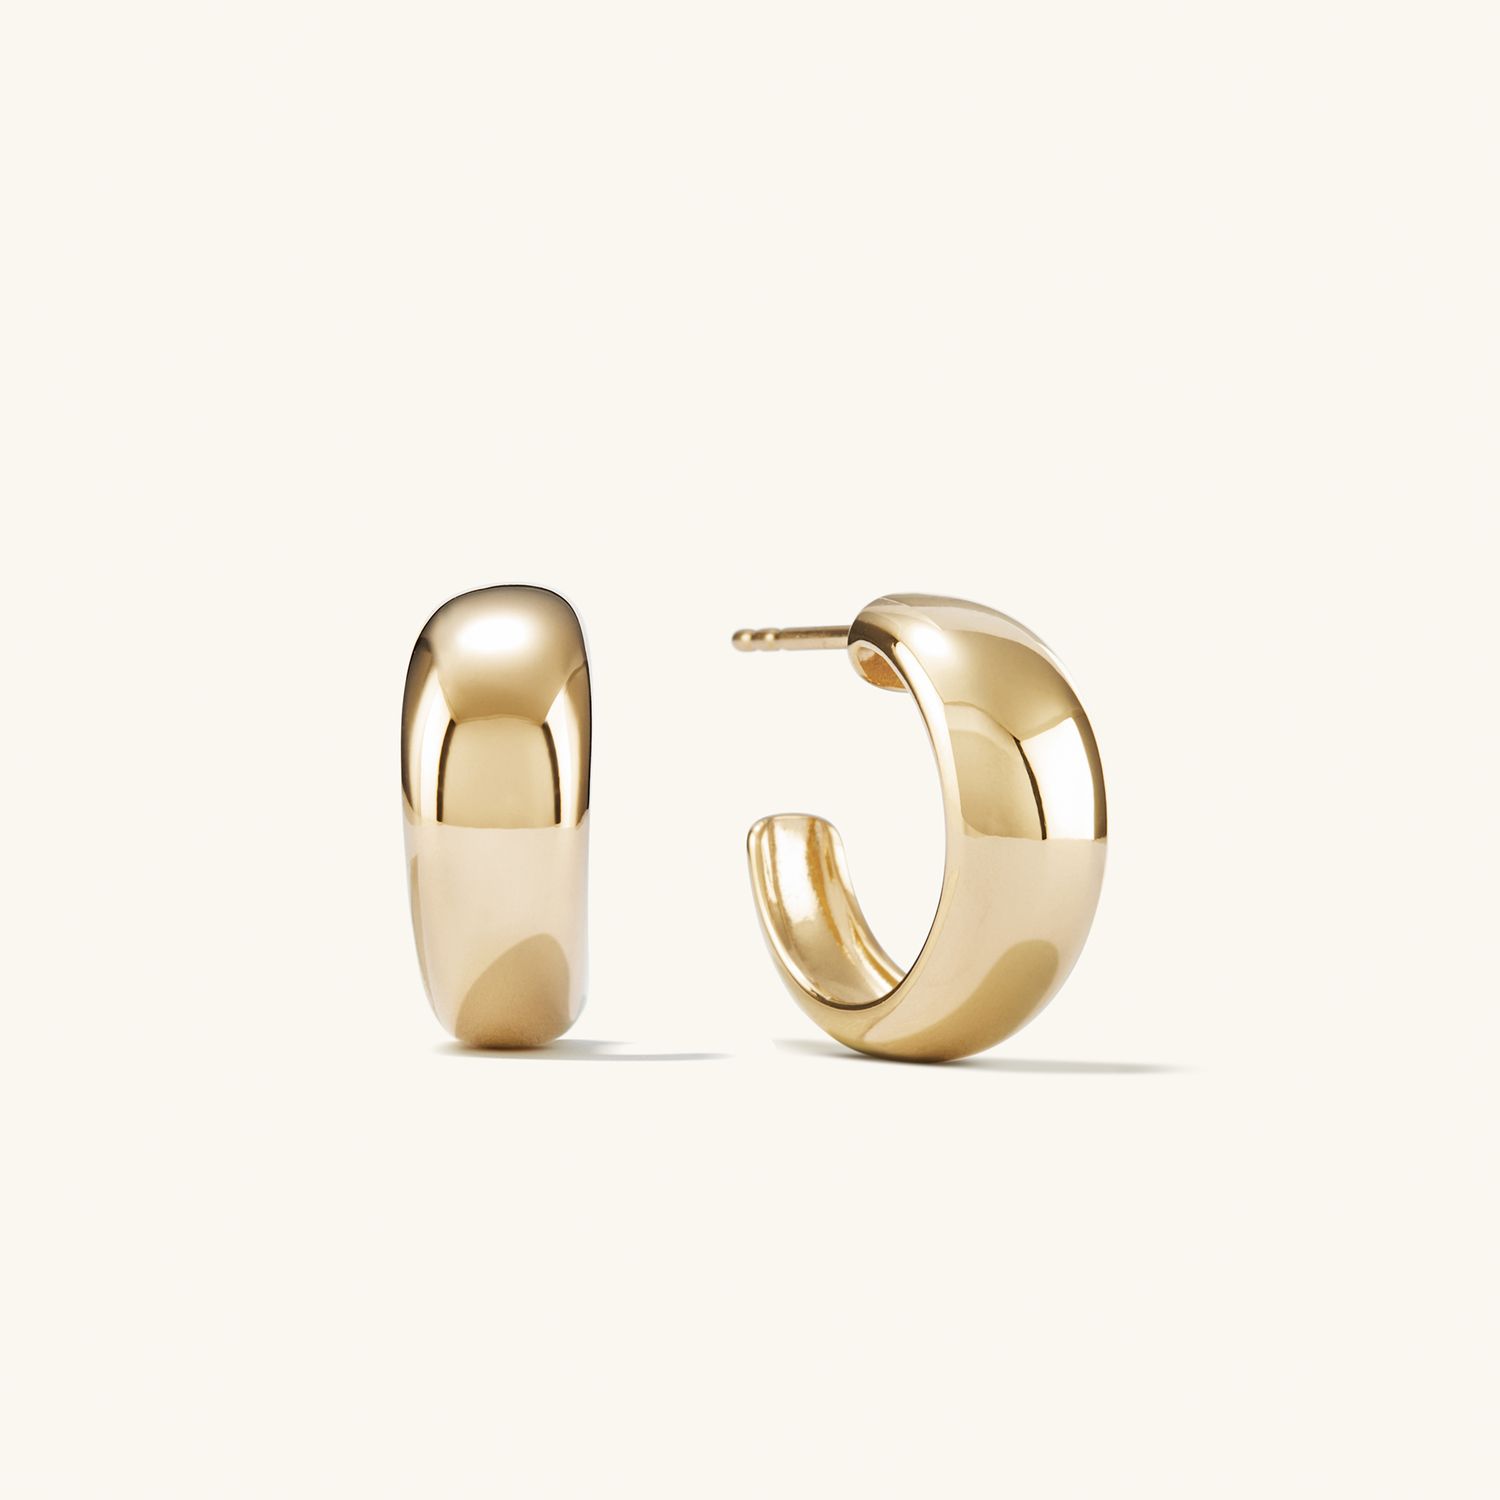 Stylish 25Mm Round Gold Plated Hoop Earrings | Harfi | Wolf & Badger